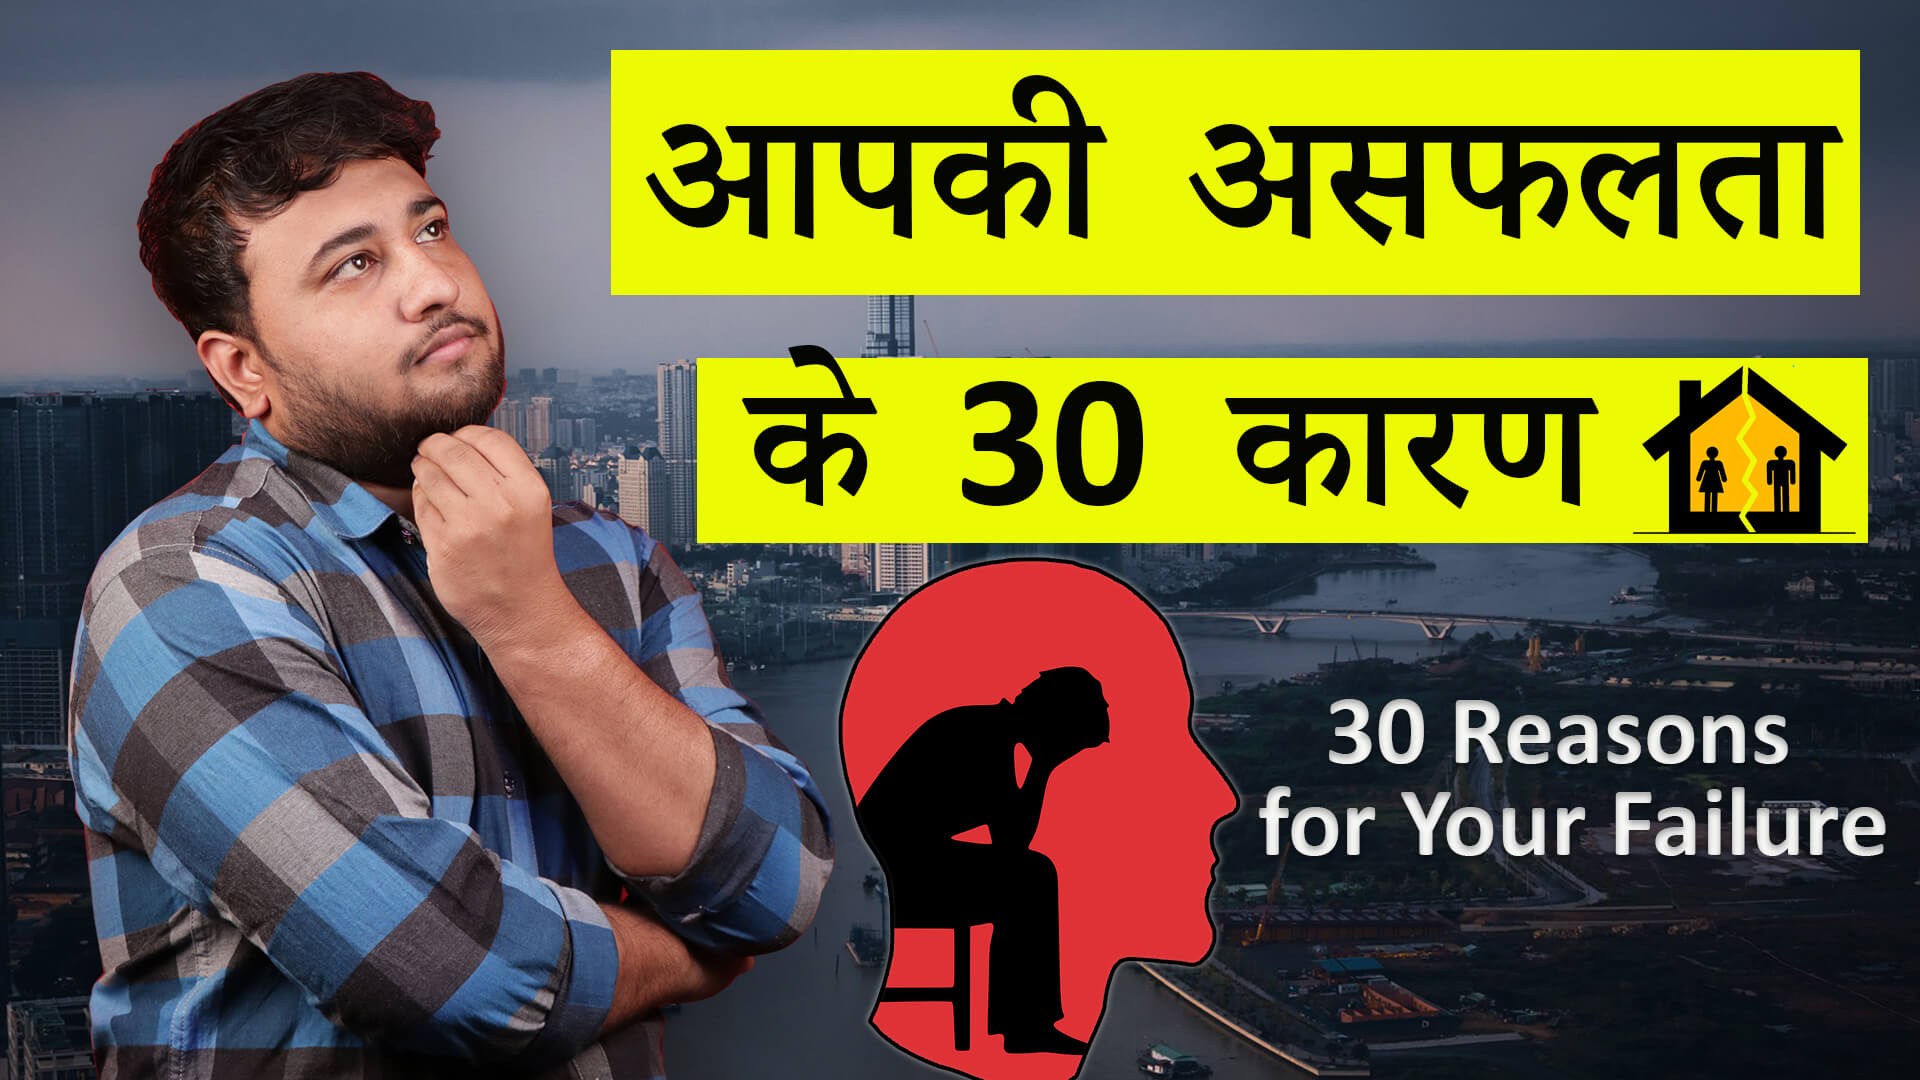 You are currently viewing 30 Reasons for Your Failure in Hindi – आपकी असफलता के 30 कारण